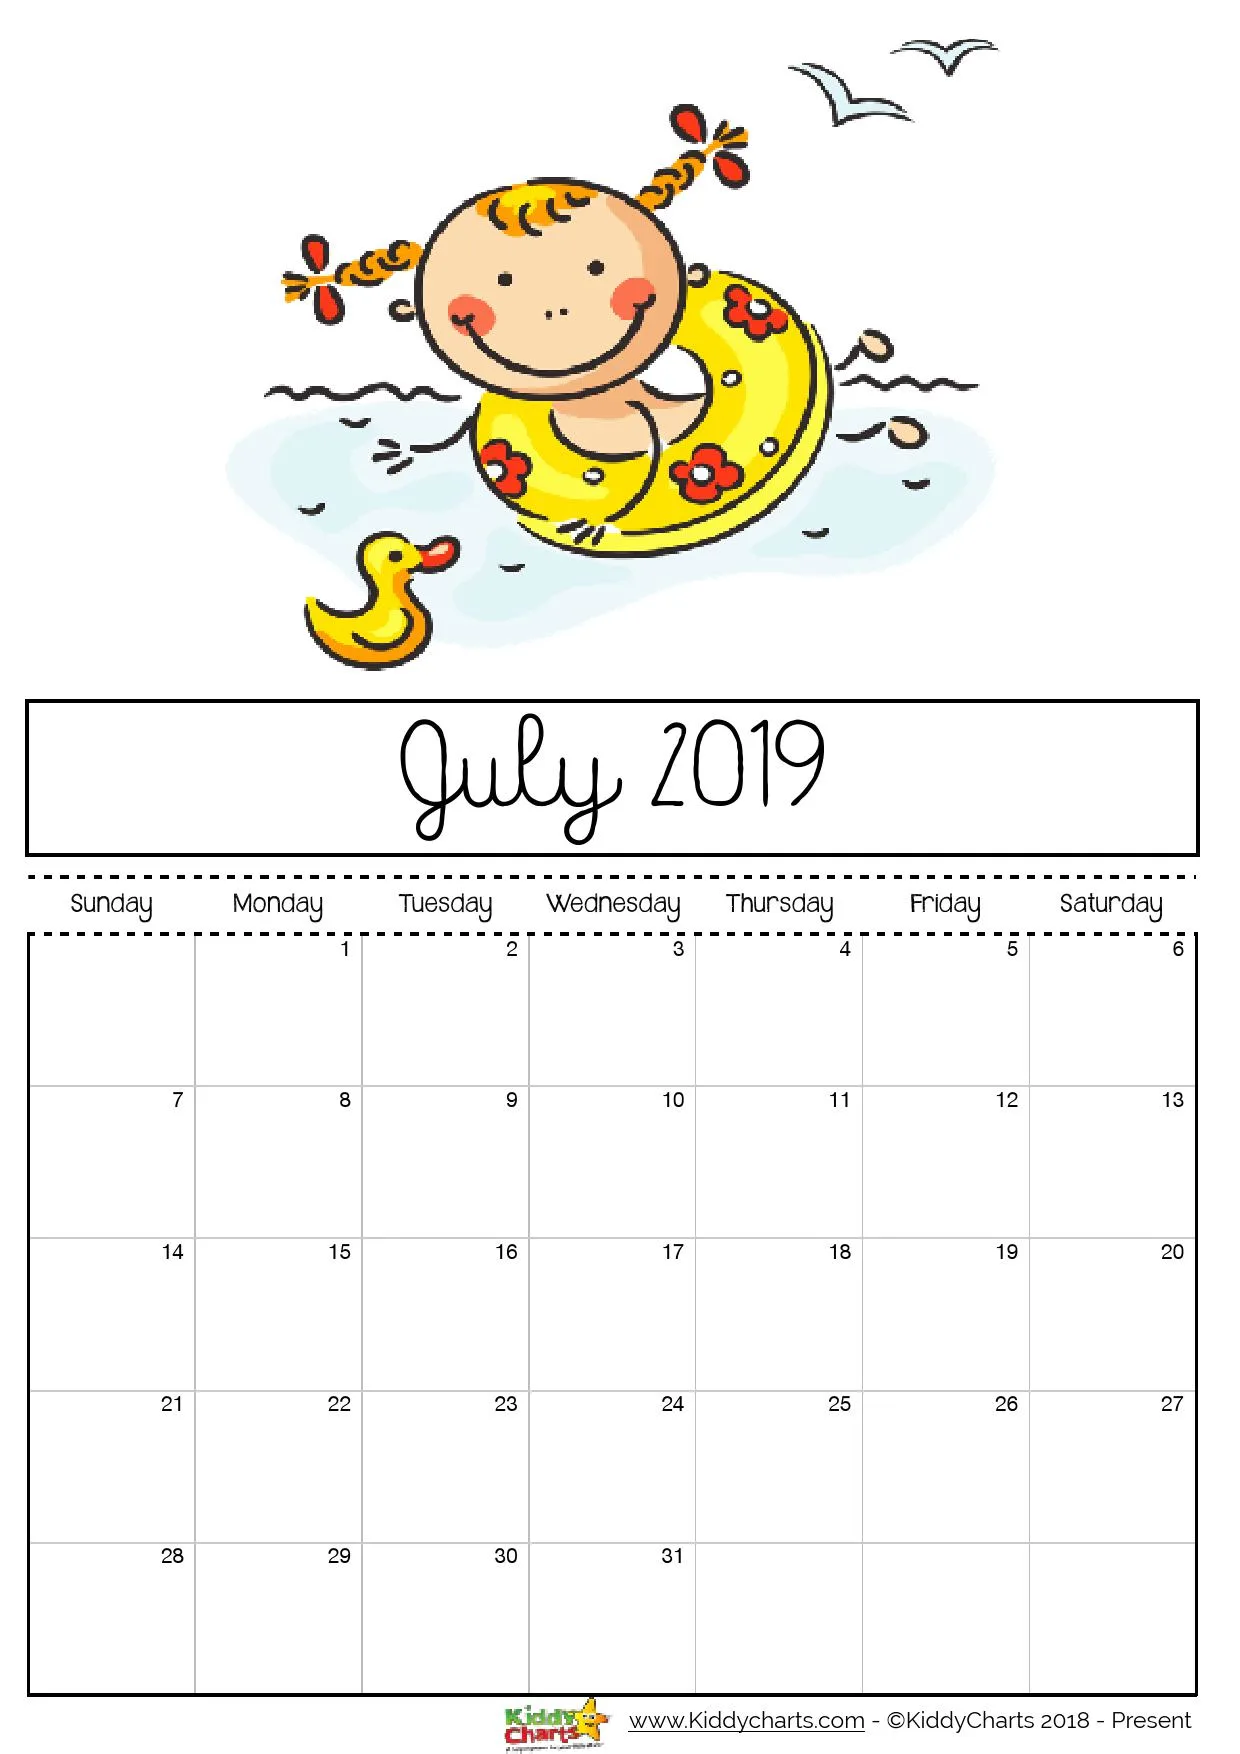 July 2019 printable calendar - girl with a rubber ring and a rubber duck swimming; doesn't it want to make you get your feet wet too! 